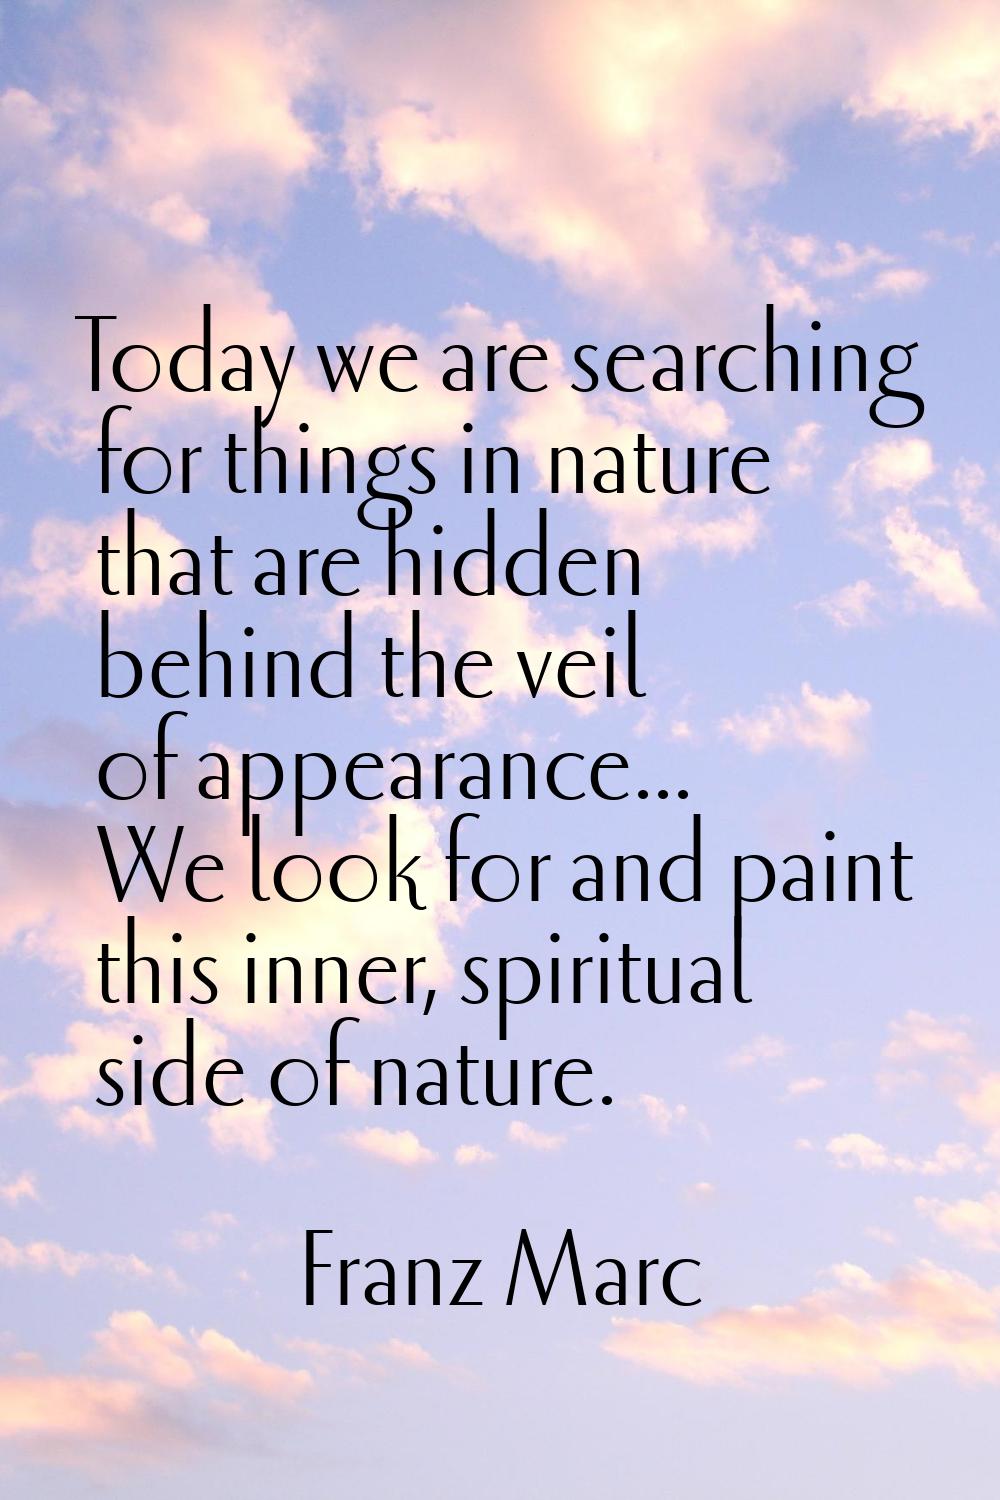 Today we are searching for things in nature that are hidden behind the veil of appearance... We loo